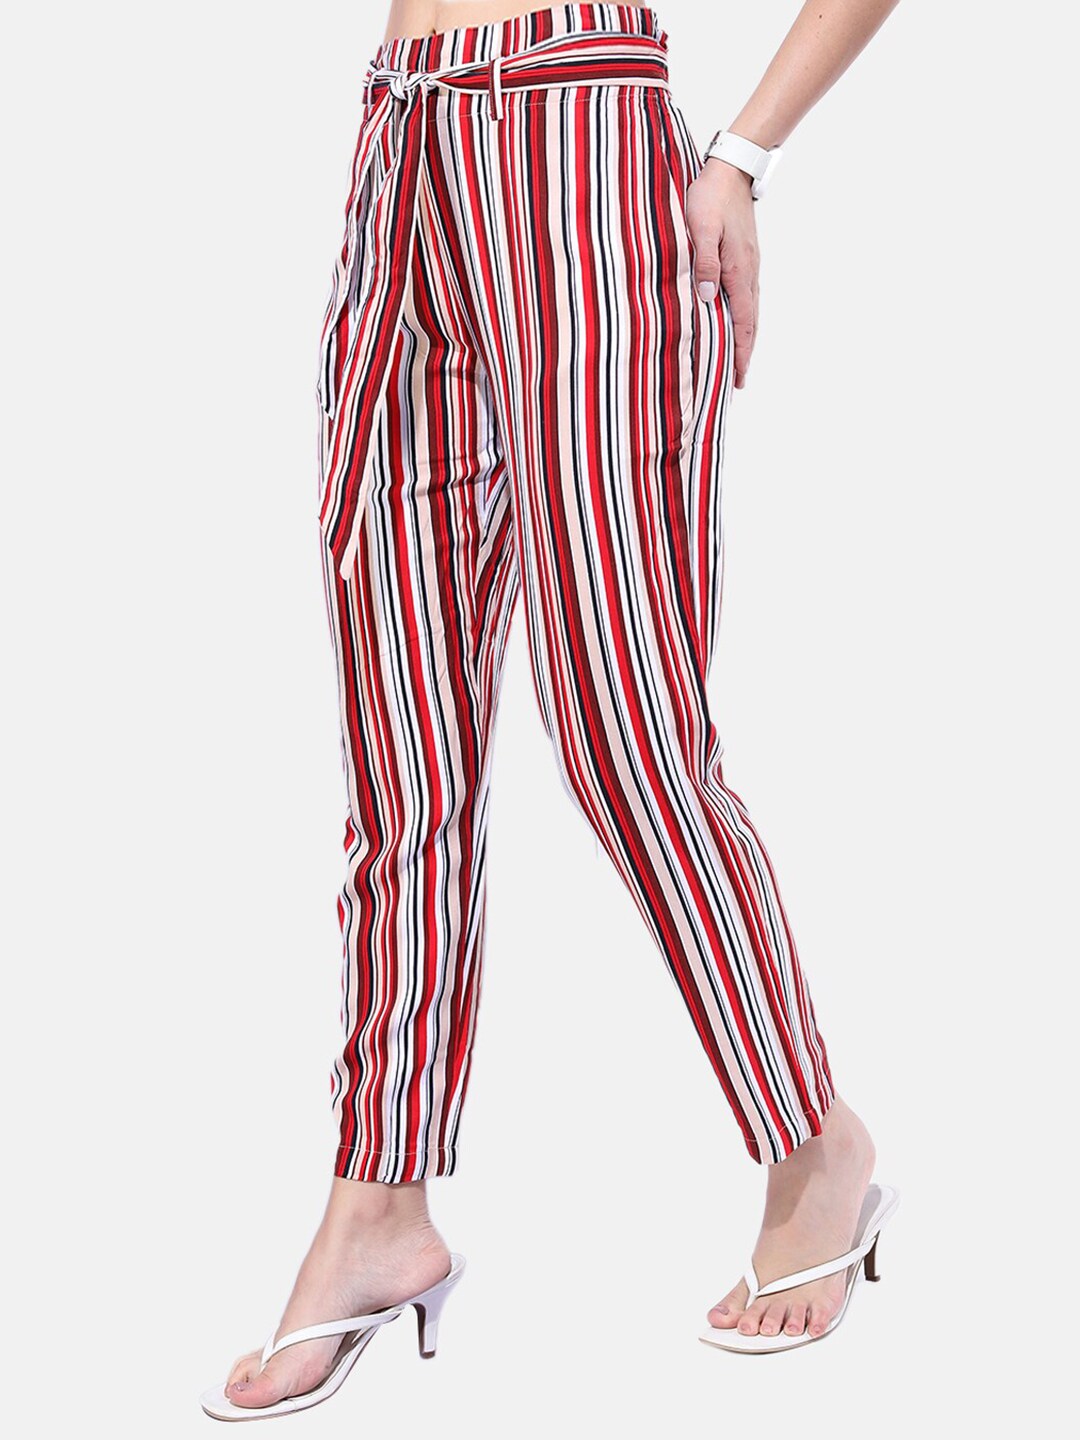 Shop Women Striped Tapered Pants Online.